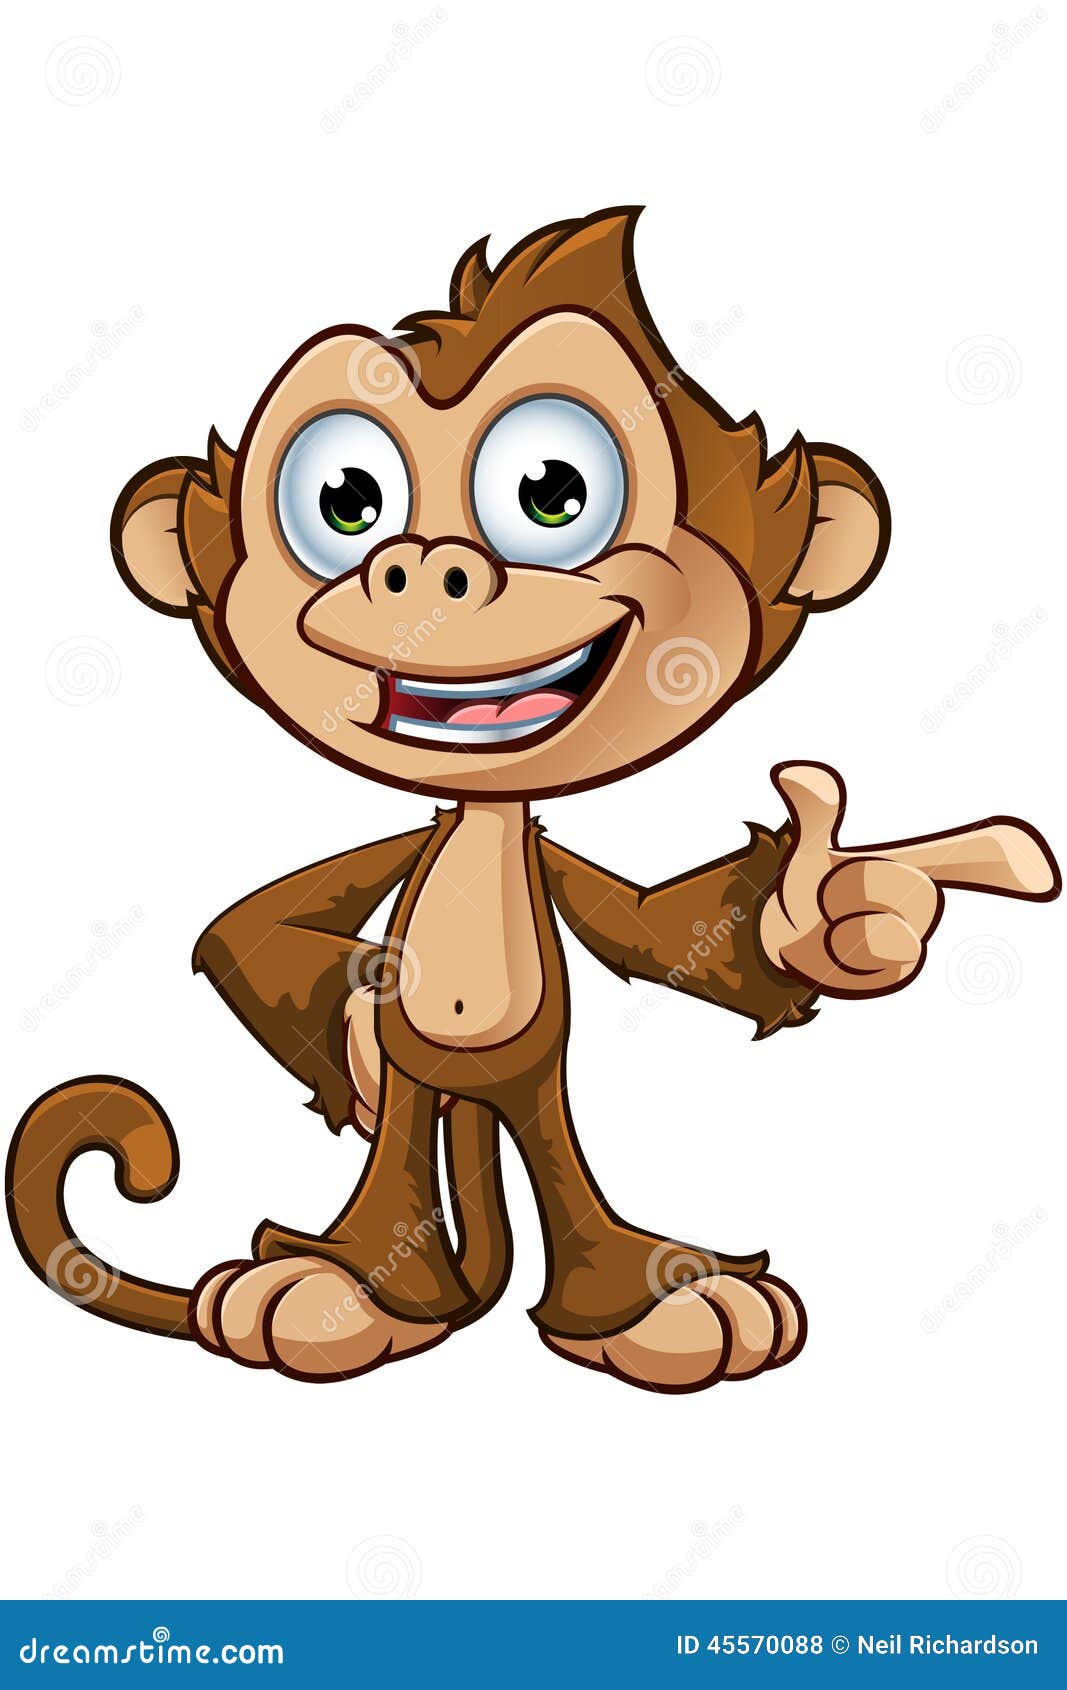 Cheeky Monkey Character stock vector. Illustration of jungle - 45570088